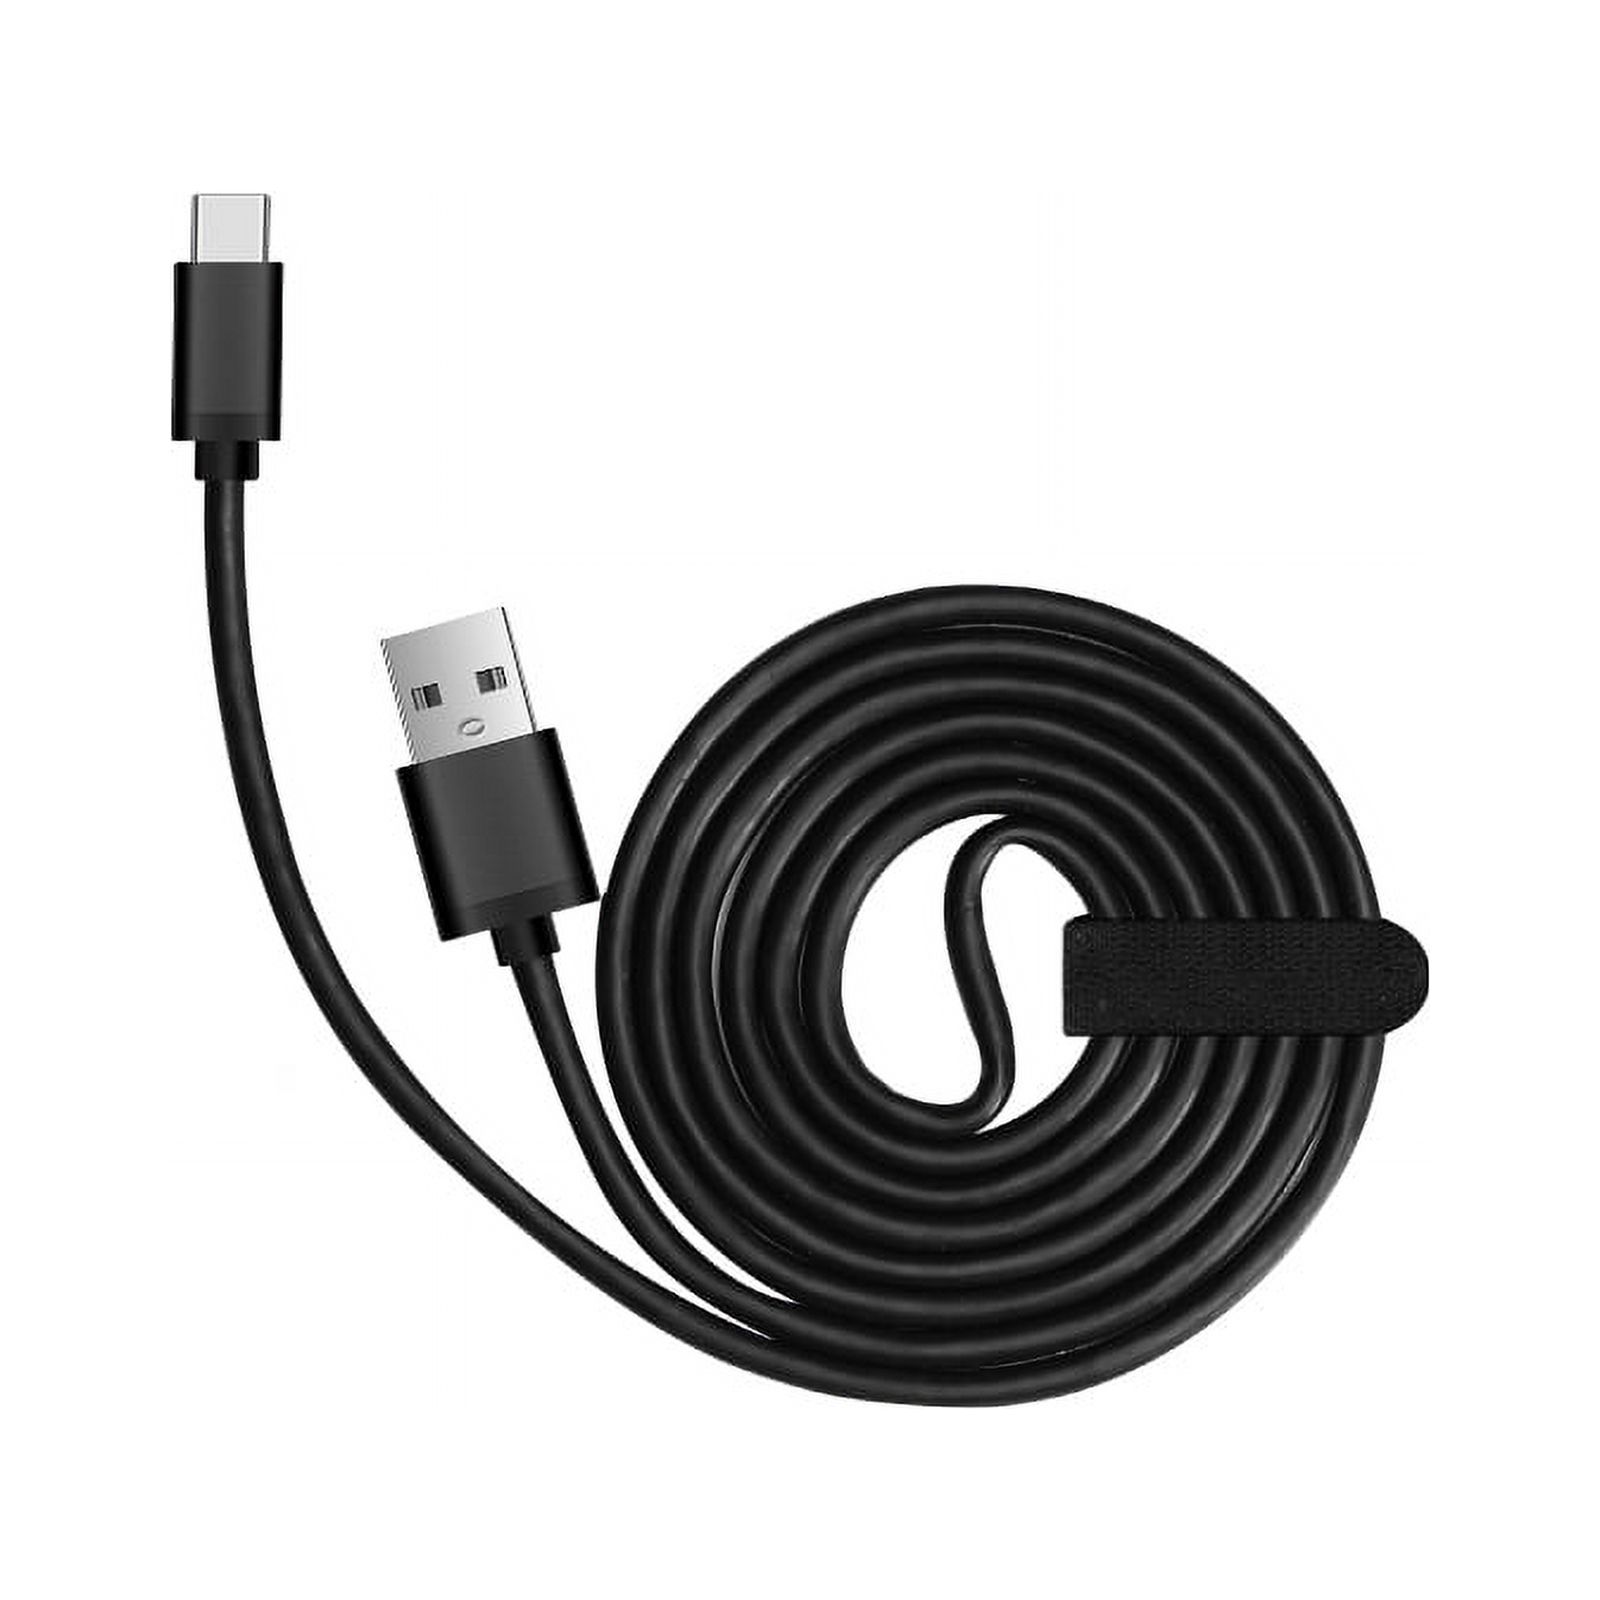 Type-C USB Data/Charger Cable for Sony WH-XB700, WH-XB900N Bluetooth Wireless Headphones - image 2 of 4